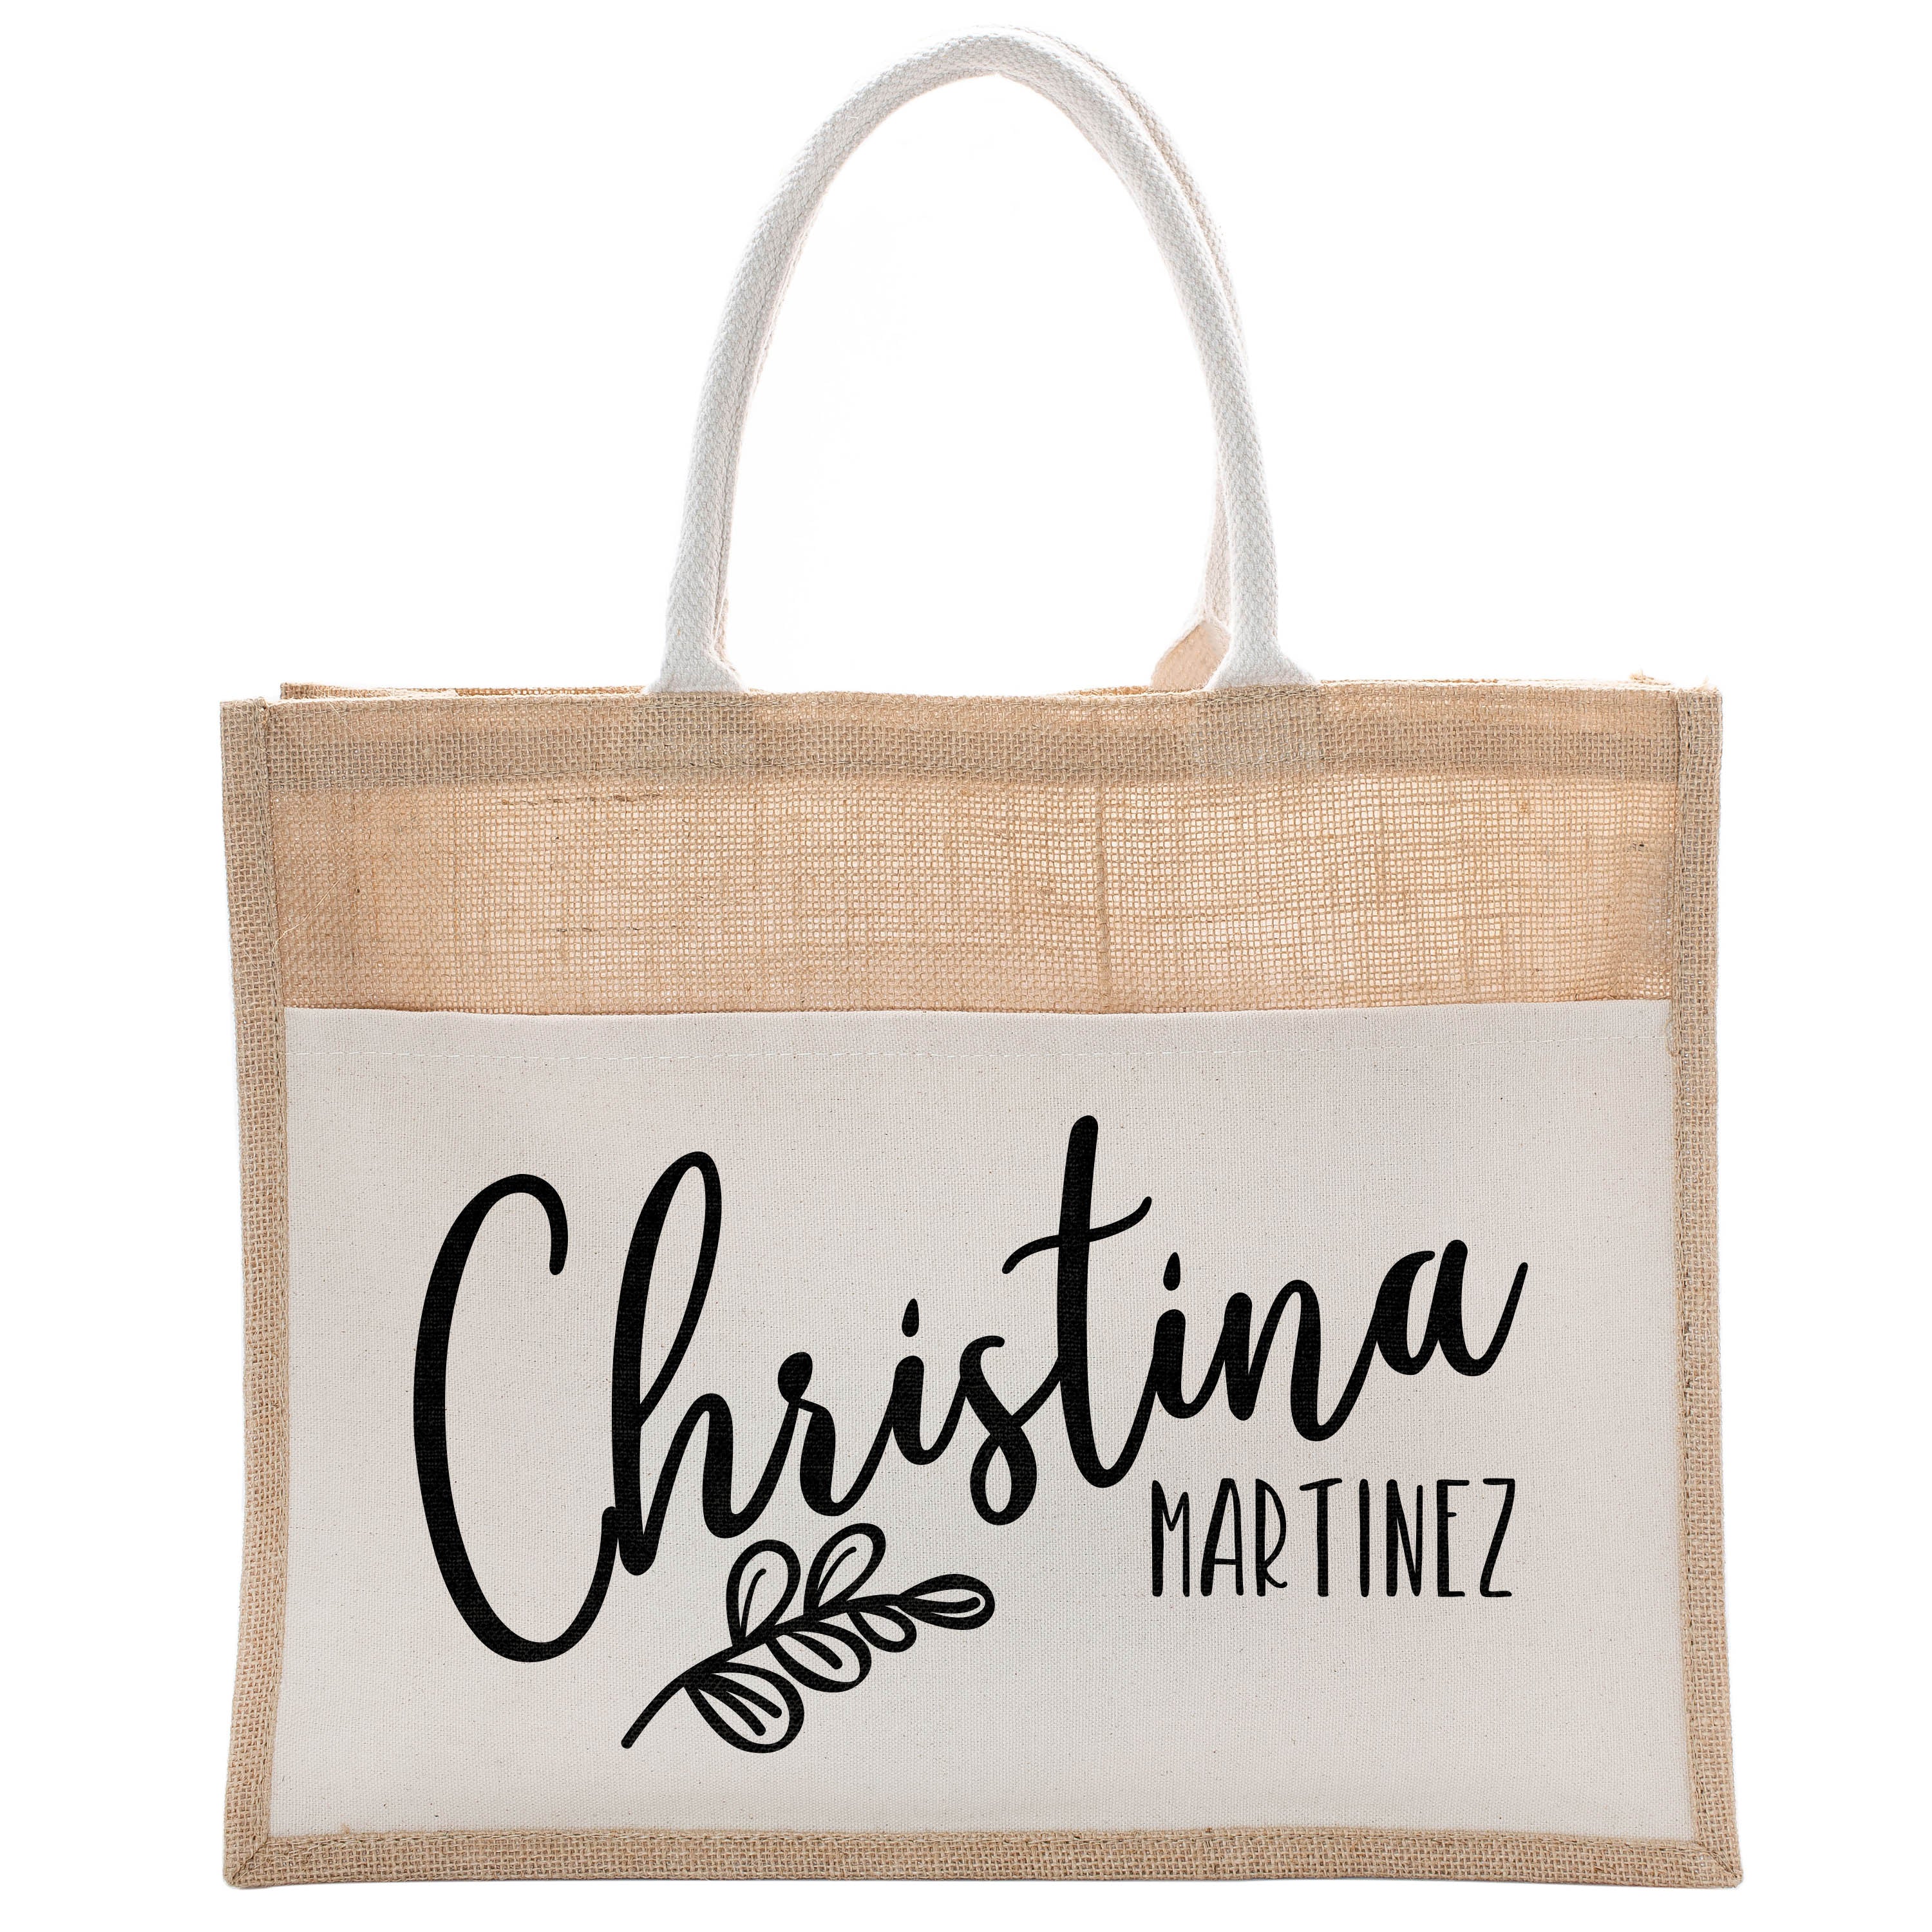 Personalized Name Tote Bags for Women - 17 Color Options - Customized  Cotton Canvas Shoulder Bag - Custom Bridesmaid Proposal Gifts -  Customizable